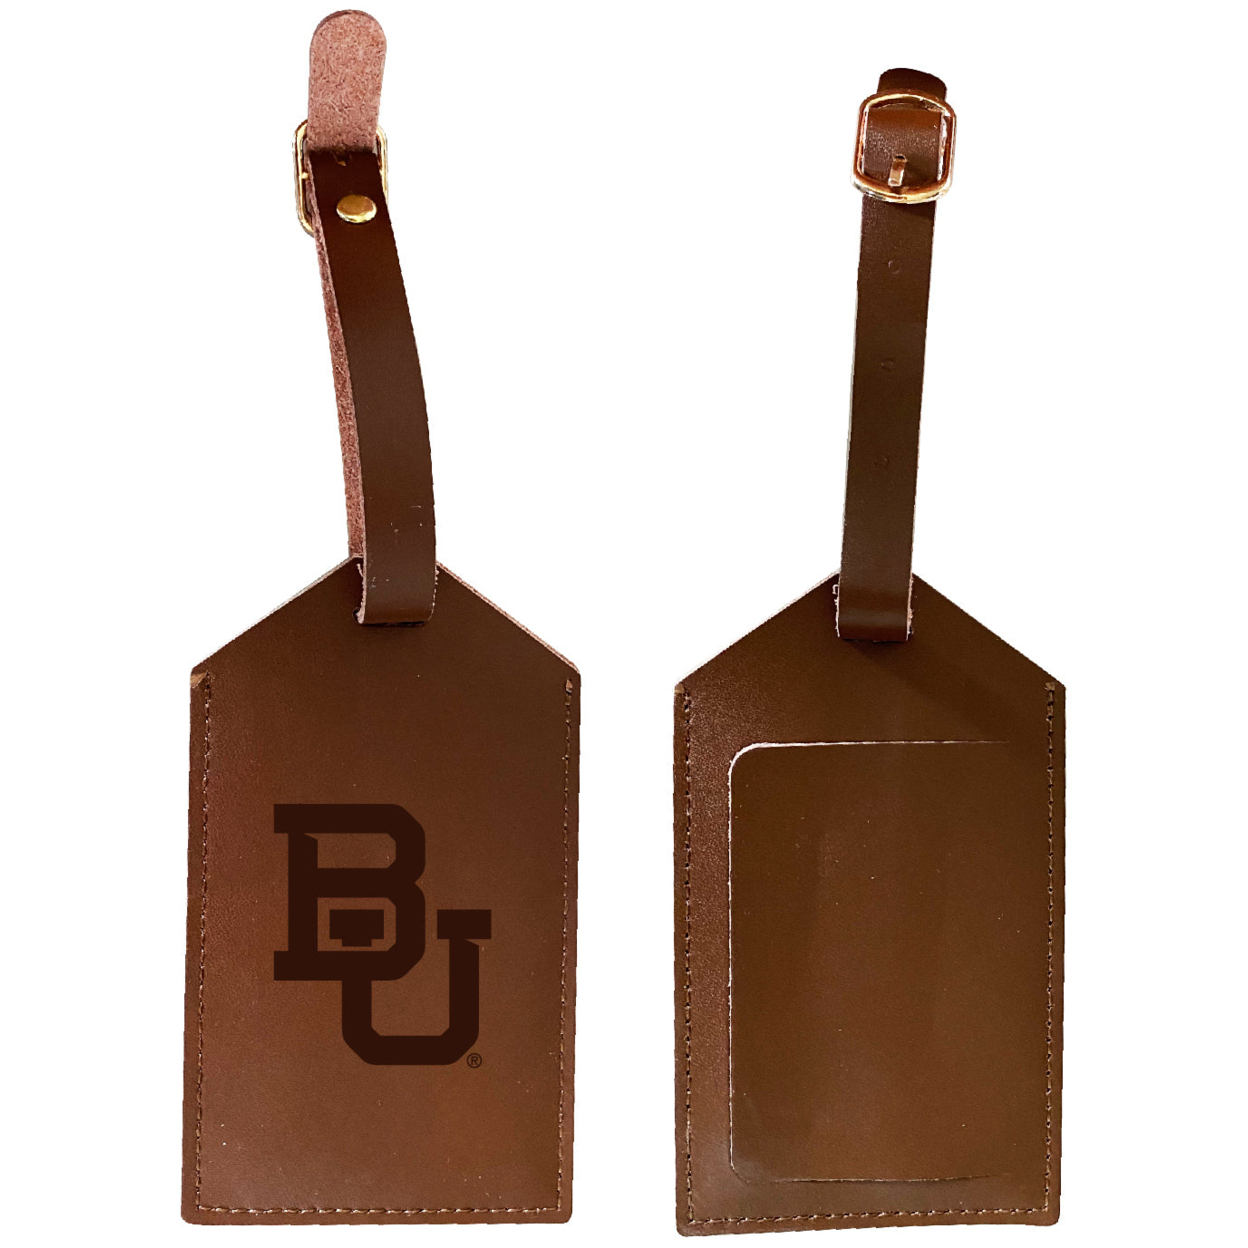 Baylor Bears Leather Luggage Tag Engraved